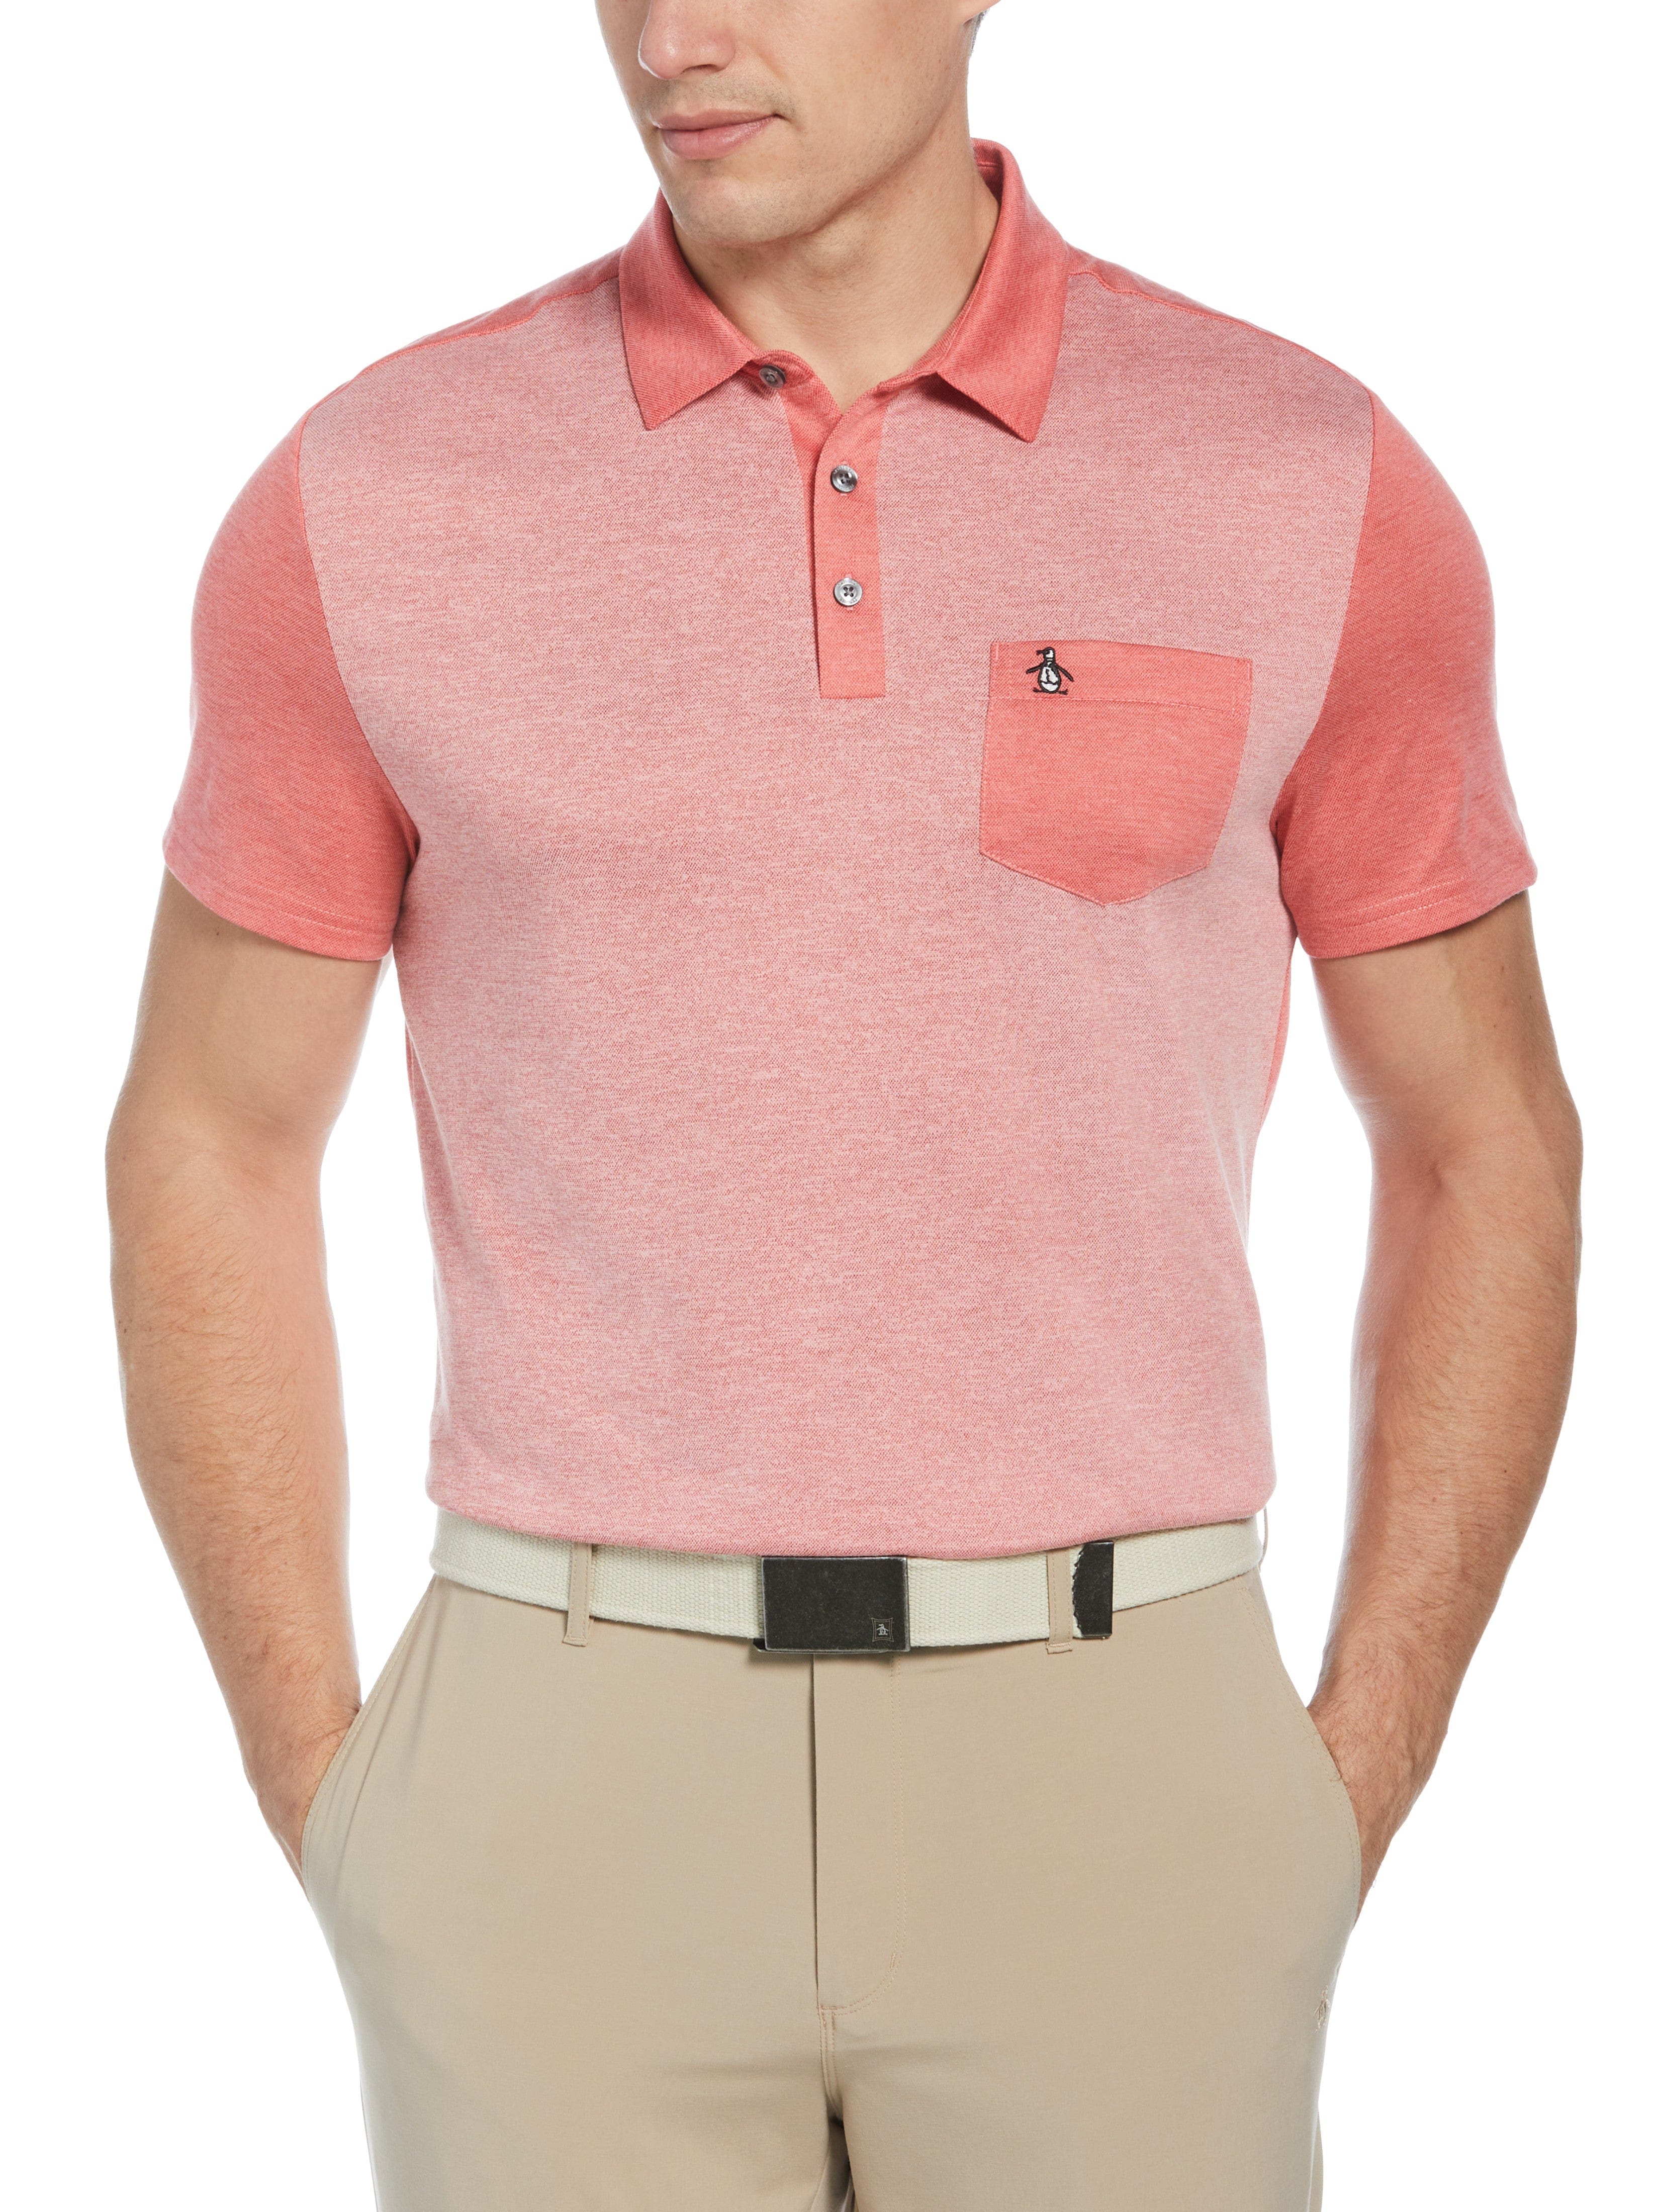 Original Penguin Mens Color Block Golf Polo Shirt, Size Medium, Bittersweet Red, Polyester/Recycled Polyester/Cotton | Golf Apparel Shop